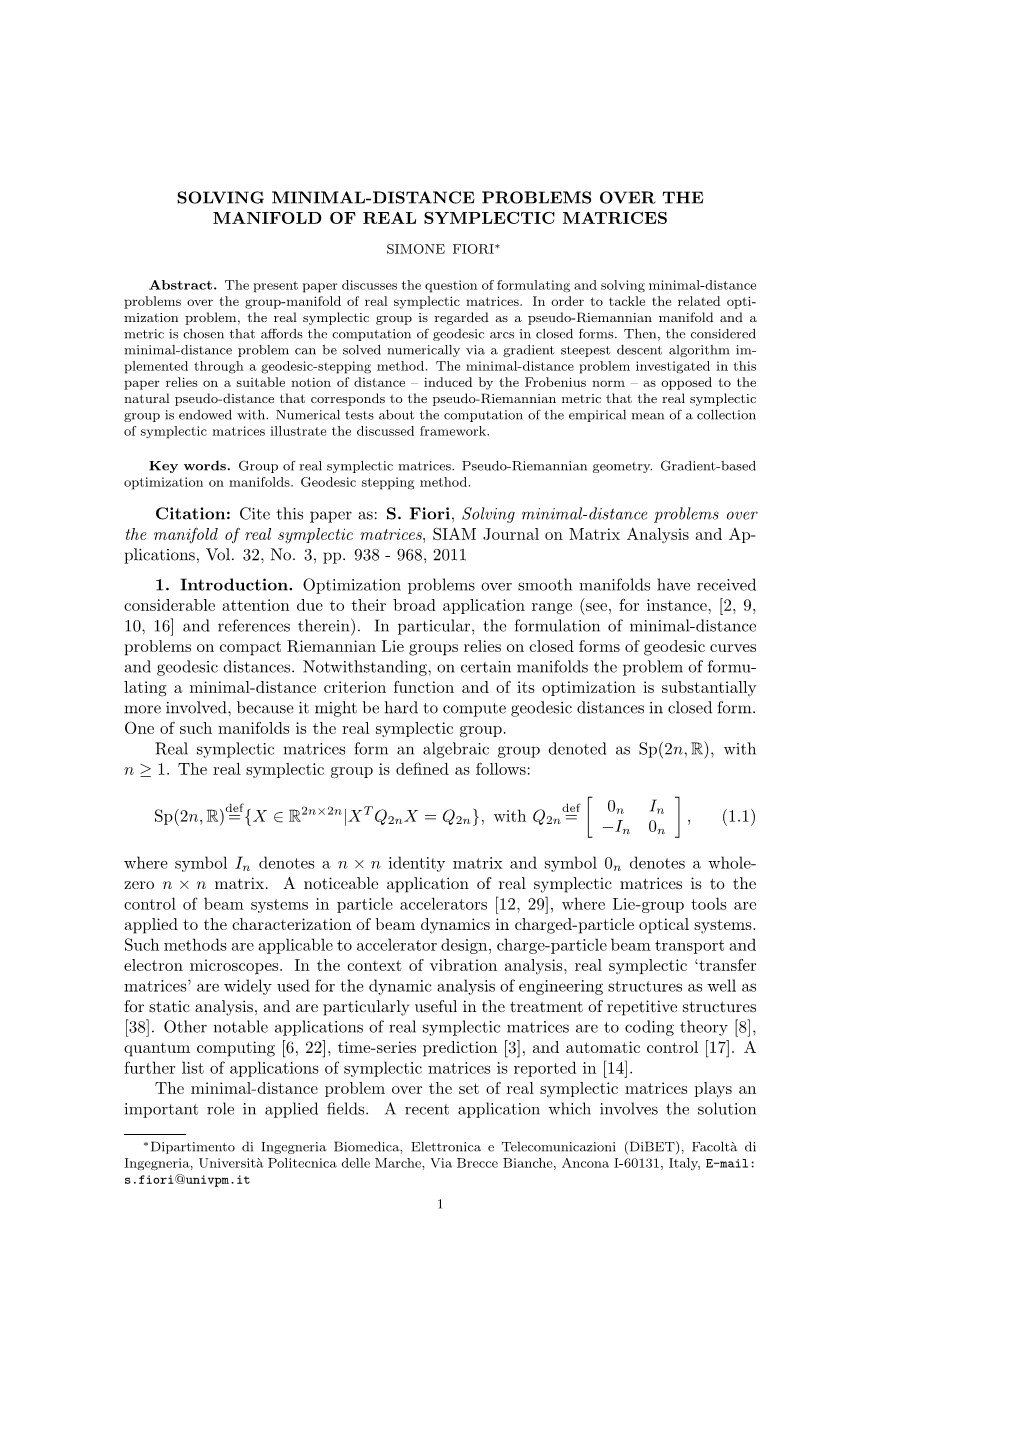 Solving Minimal-Distance Problems Over the Manifold of Real Symplectic Matrices